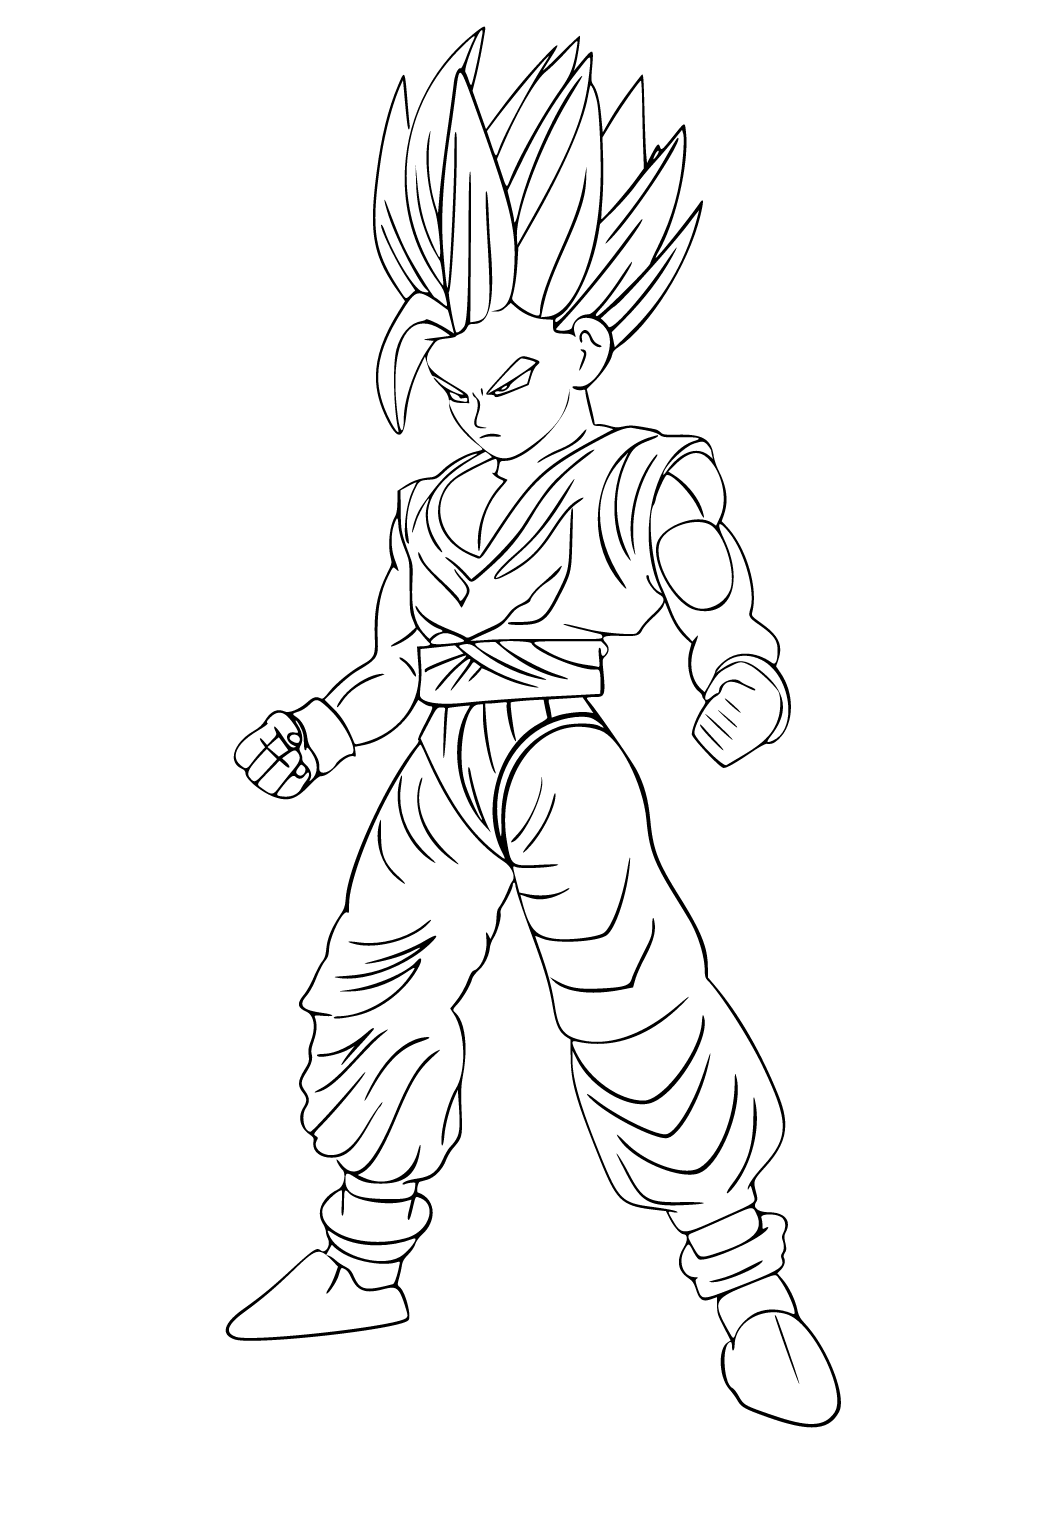 Free Printable Dragon Ball Z Goku Coloring Page, Sheet and Picture for  Adults and Kids (Girls and Boys) 